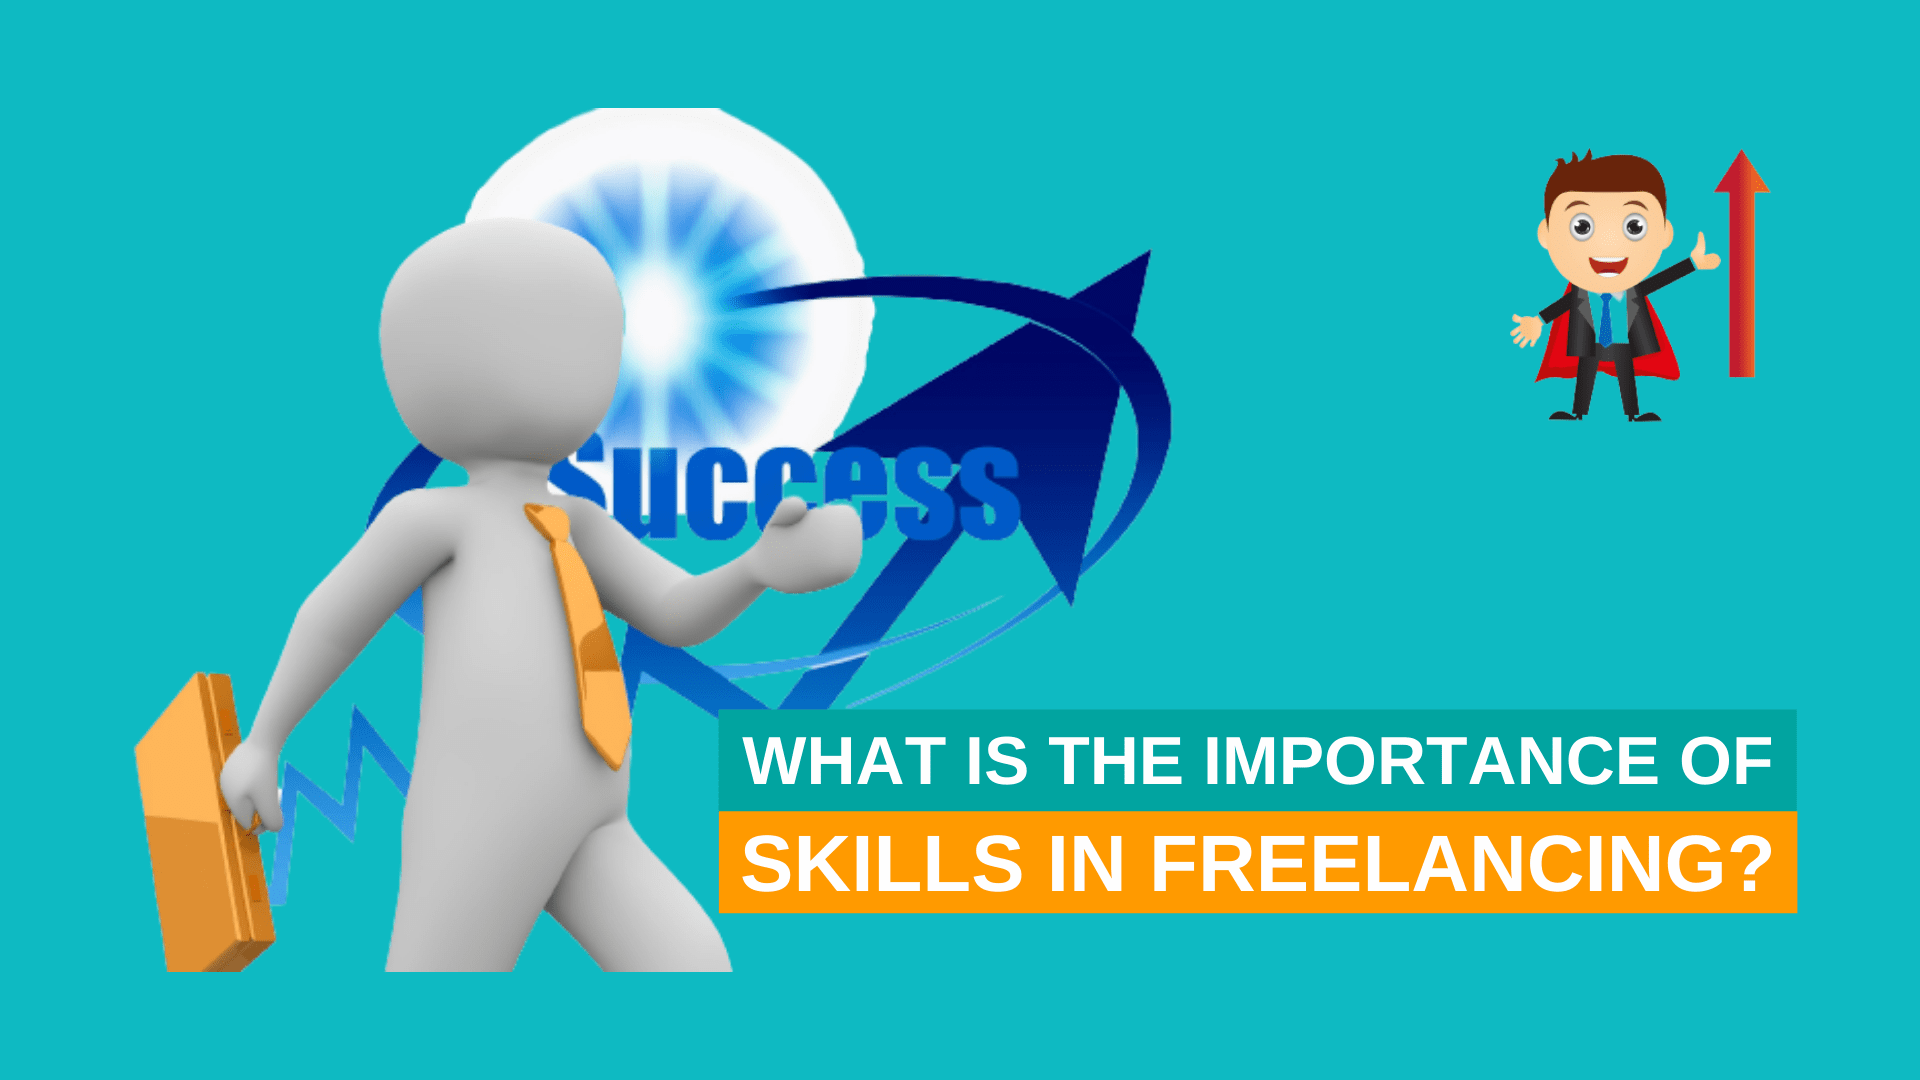 How Much Do the Skills Matter in Freelancing